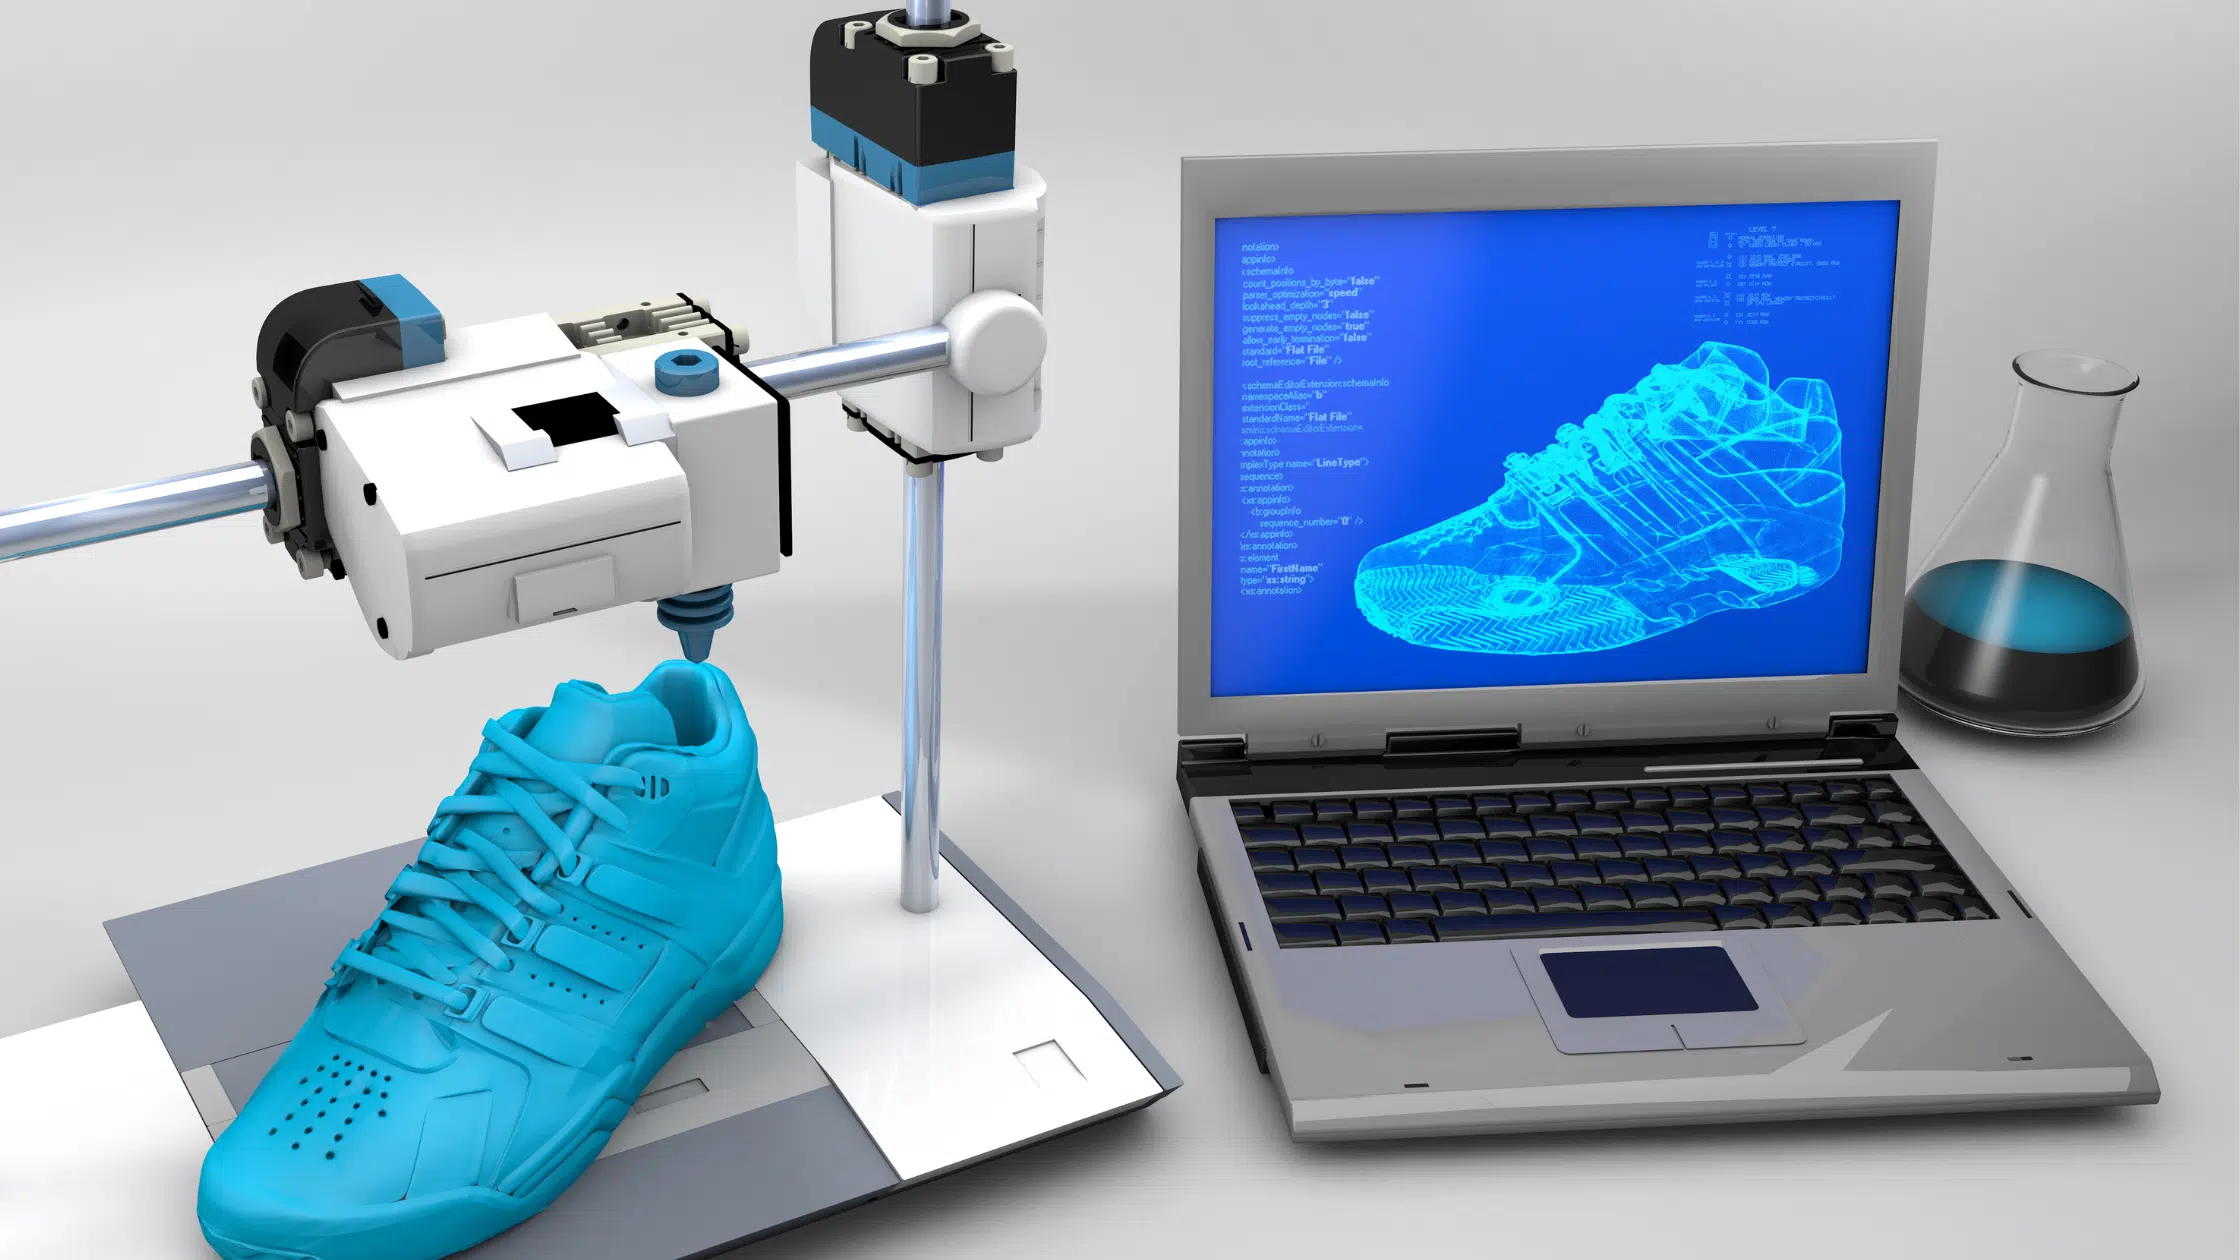 Top 10 Must-Have Accessories To Supercharge Your 3D Printing Experience! 